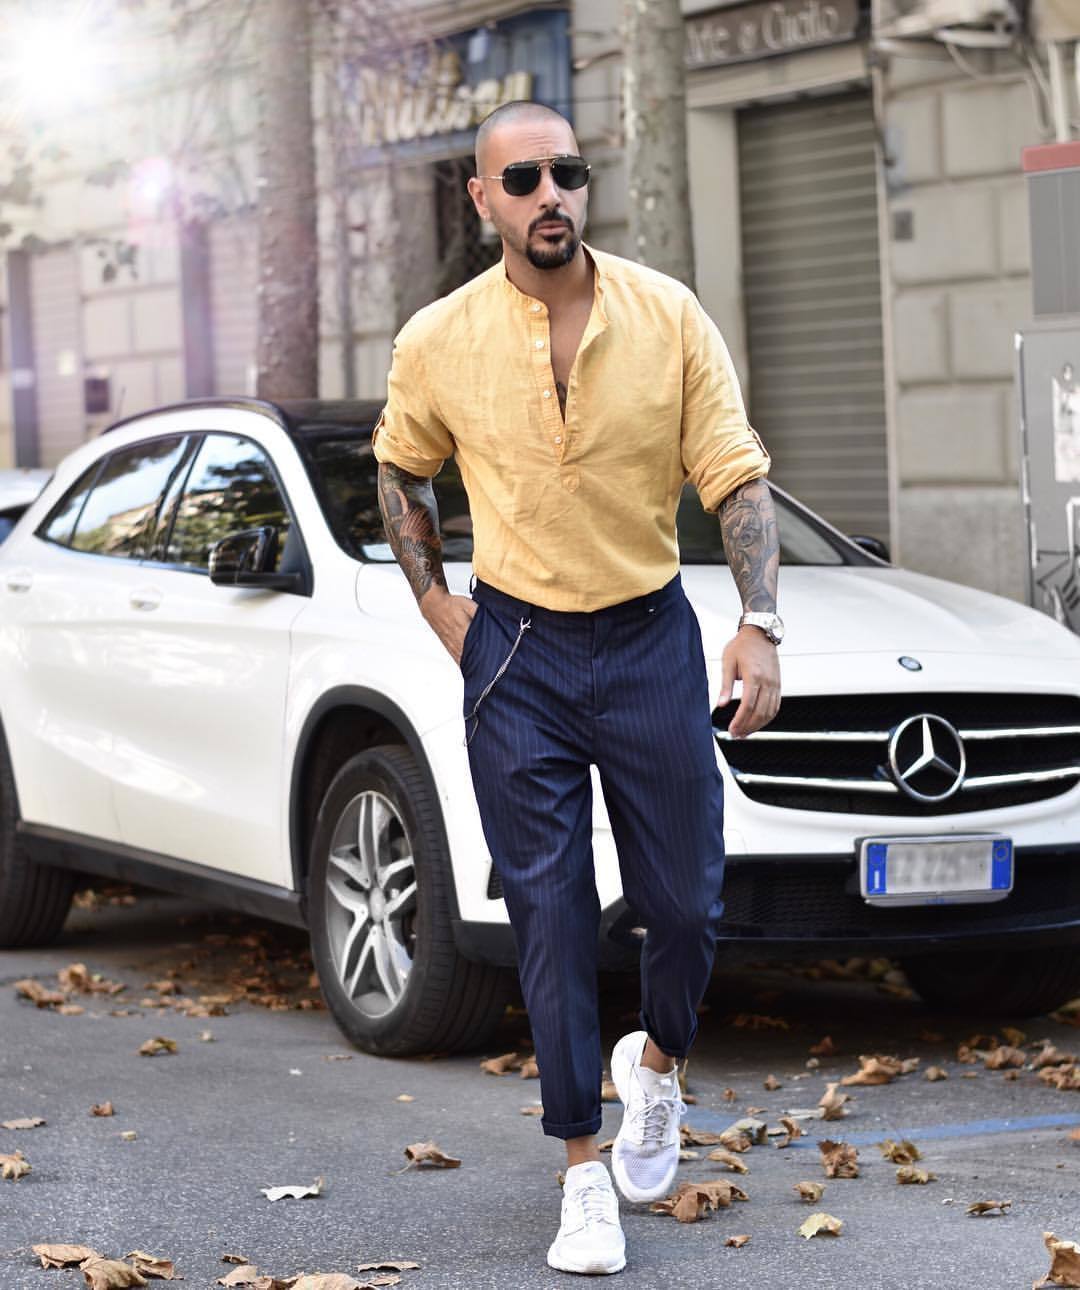 Men's Yellow Linen Long Sleeve Shirt, Navy Vertical Striped Chinos, White  Athletic Shoes, Black Sunglasses | Lookastic